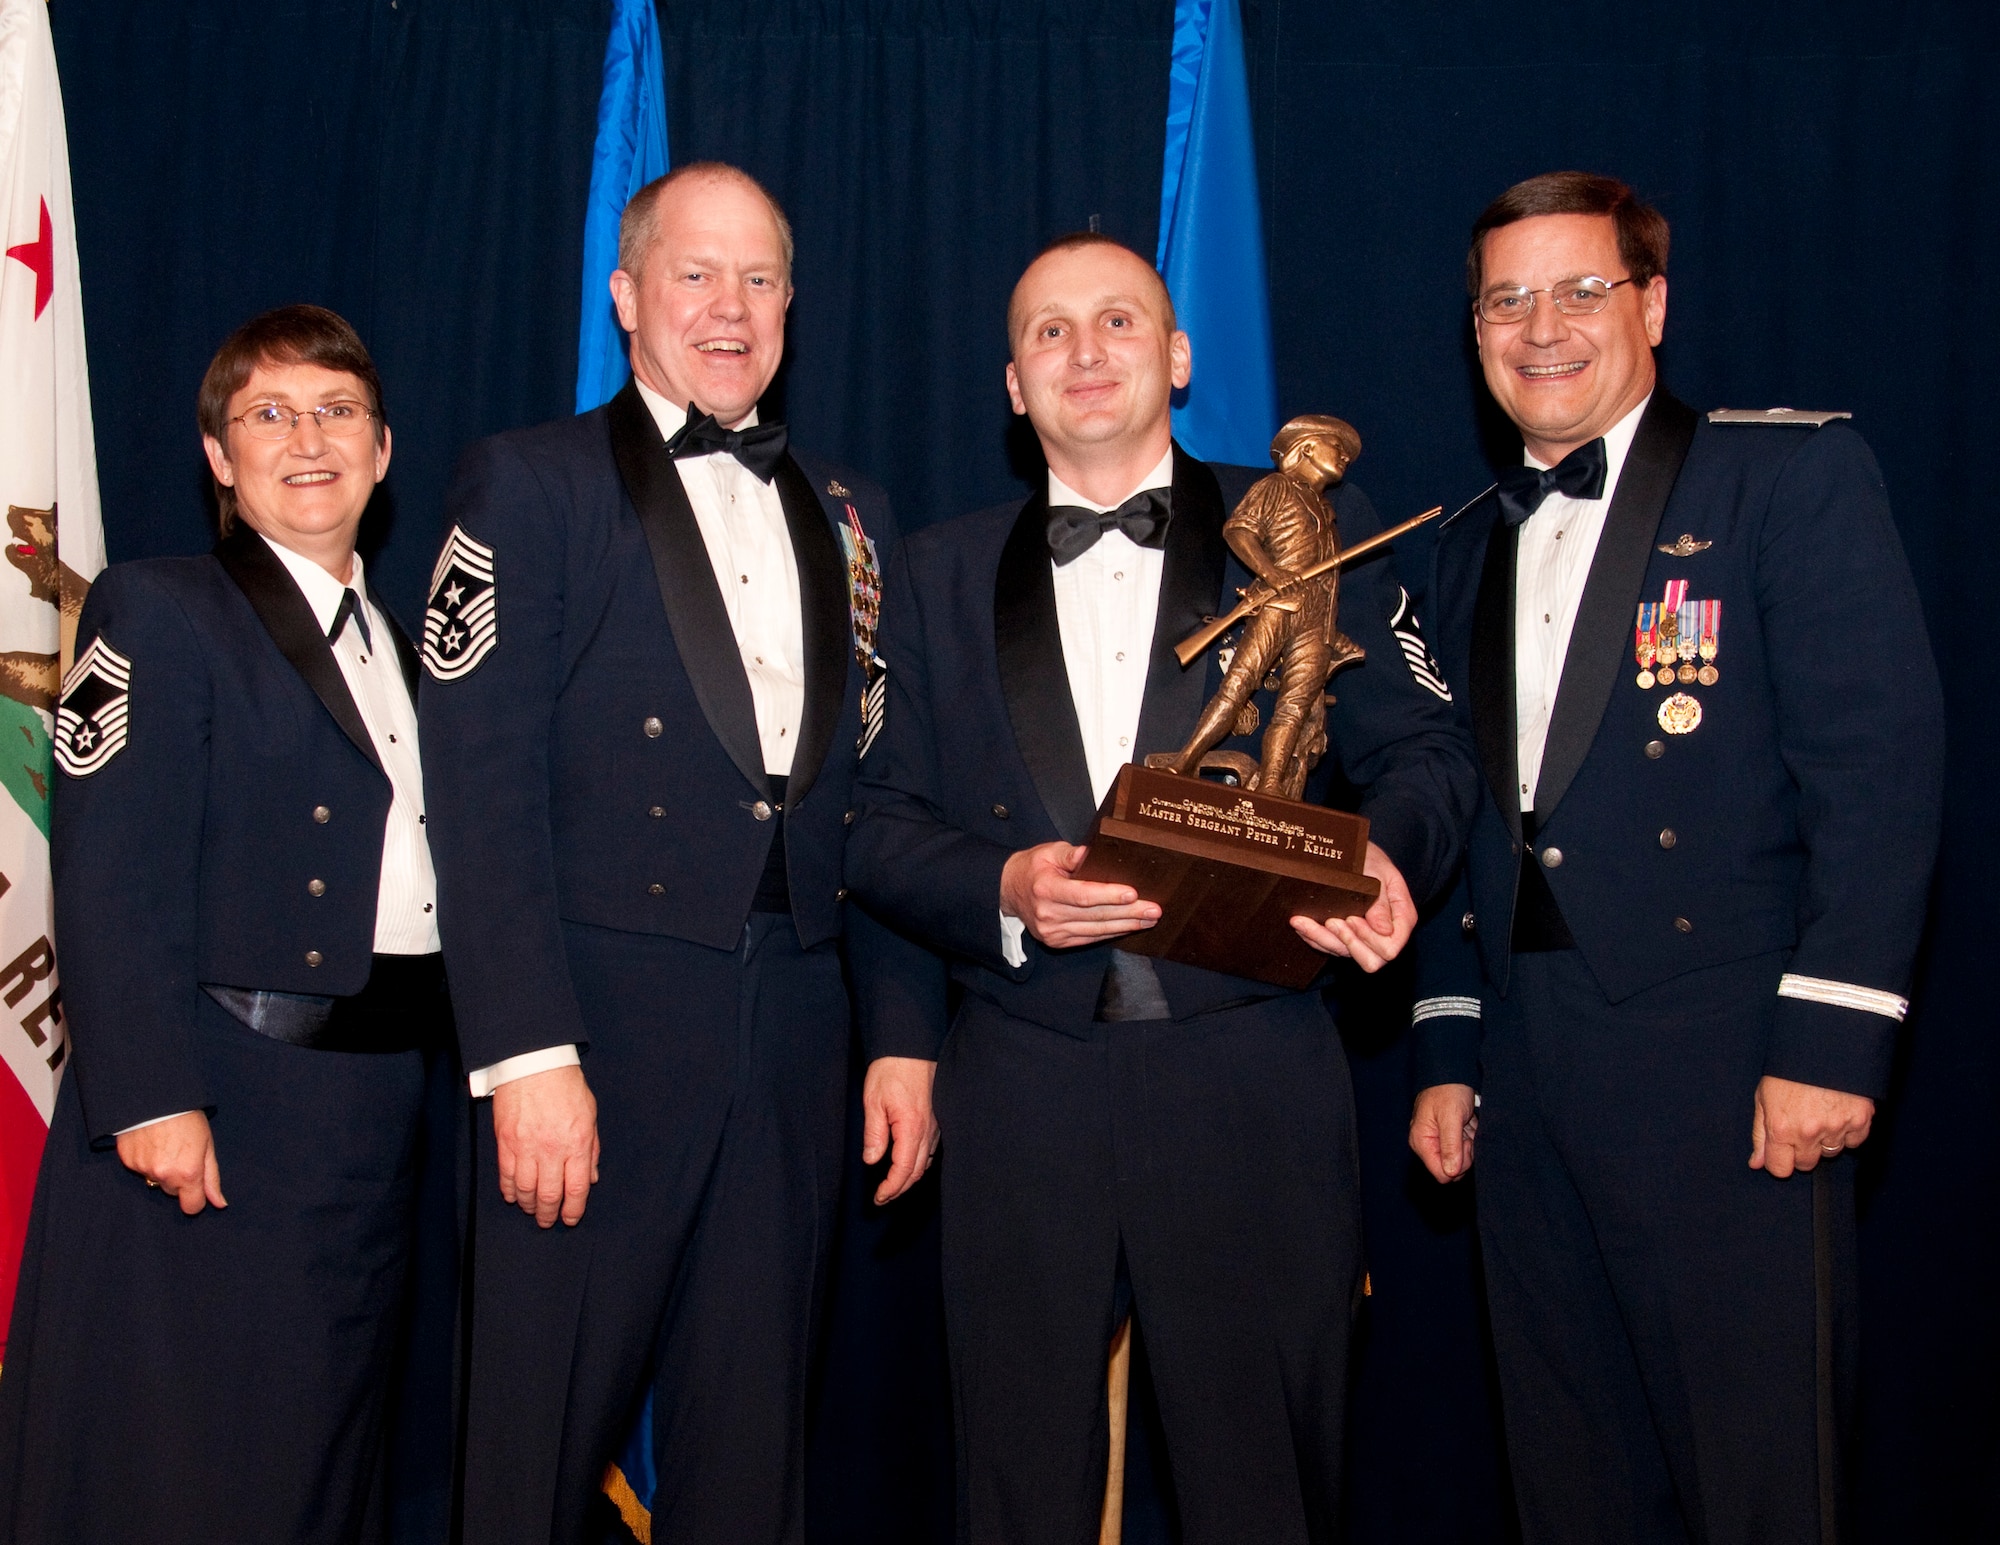 1st Sergeant Ronald Hazelton (center) from the 162rd Combat Communications Group accepts the Outstanding Airman of the Year award in the 1stSgt category. Accompanied by Chief Master Sgt. Debra Fordyce, (far left) Command Chief Master Sgt. Christopher Muncy, (left) and Brigadier General James Witham at the  annual Outstanding Airmen Of The Year Awards Banquet at The Sheraton Universal Hotel, Universal City, Calif.,  January 21, 2012. Each organization nominated four candidates for Airman of The Year, NCO of The Year, Sr. NCO of The Year and First Sergeant of The Year. U.S. Air Force photo by Tech. Sgt. Alex Koenig
